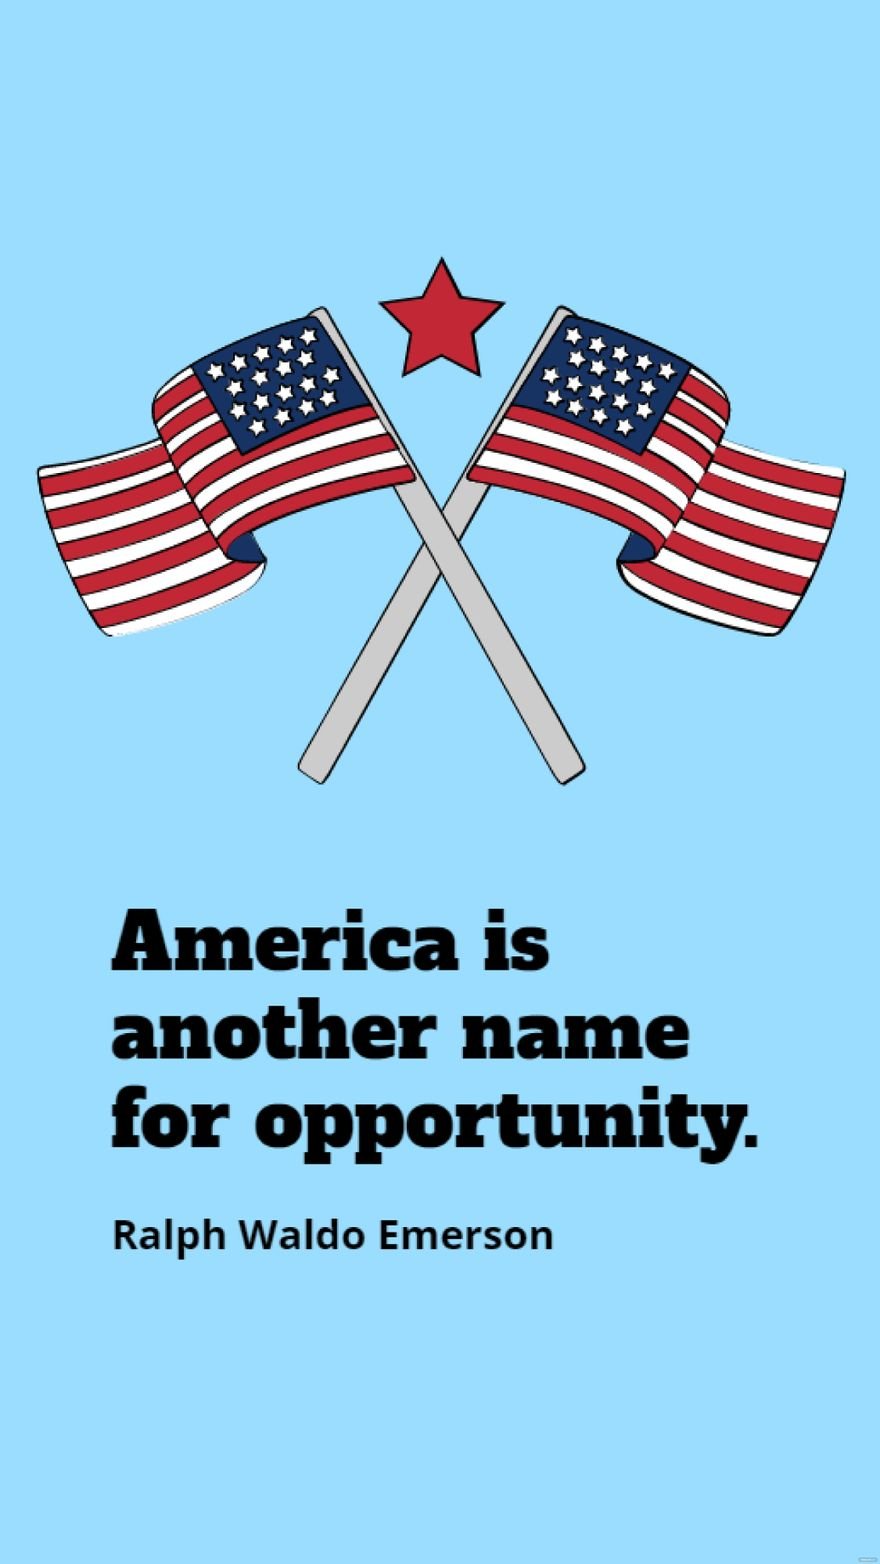 Free Ralph Waldo Emerson - America is another name for opportunity. in JPG